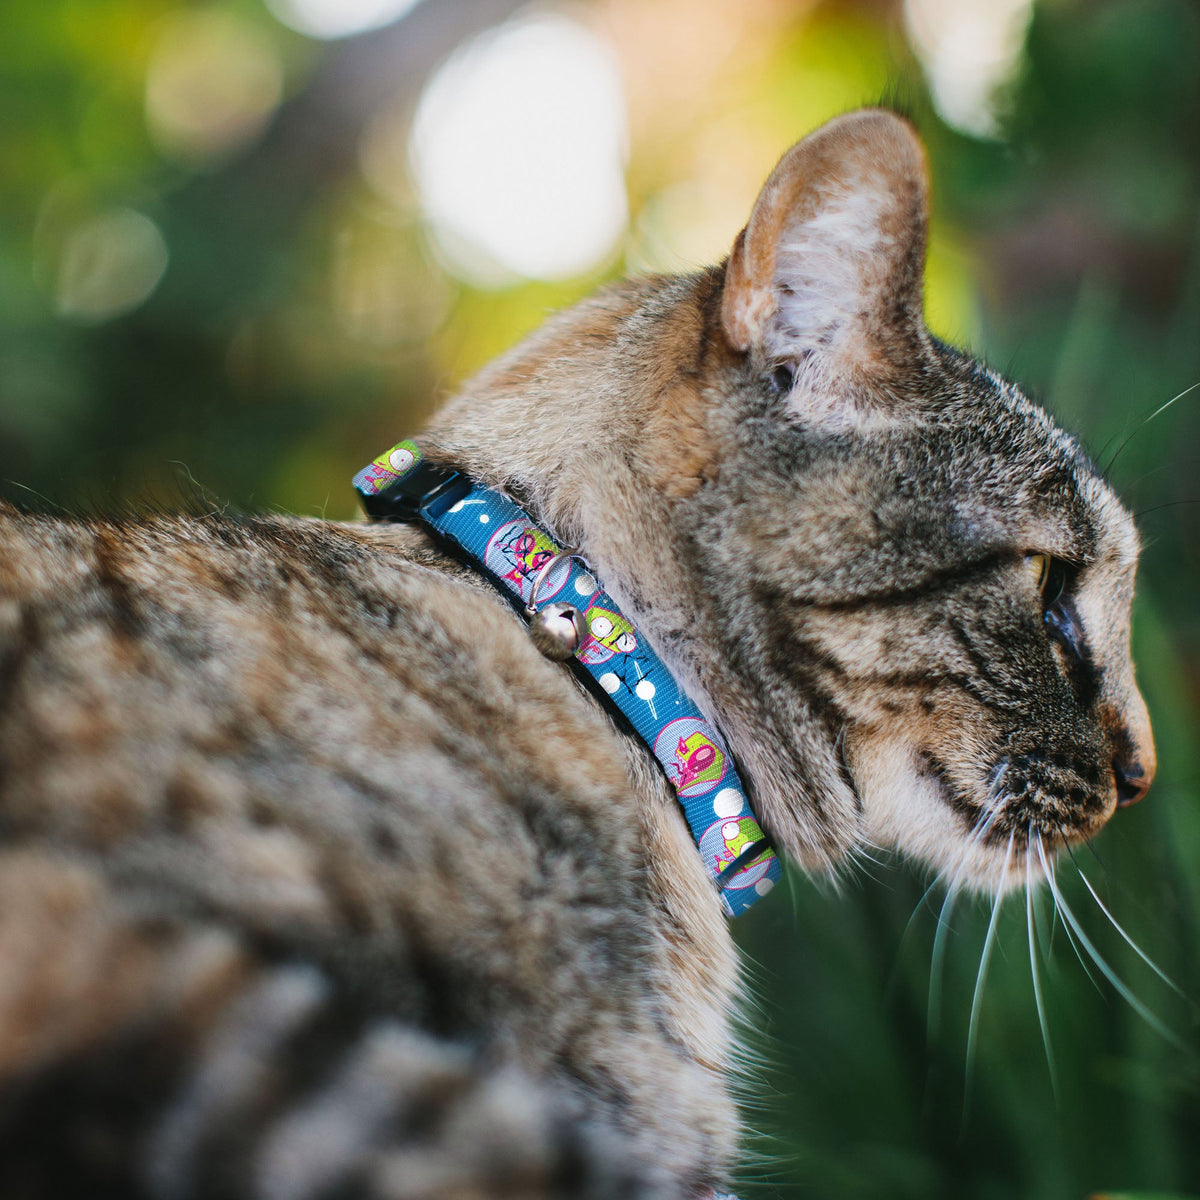 Breakaway Cat Collar with Bell - Invader Zim and GIR Poses and Planets Blue/White